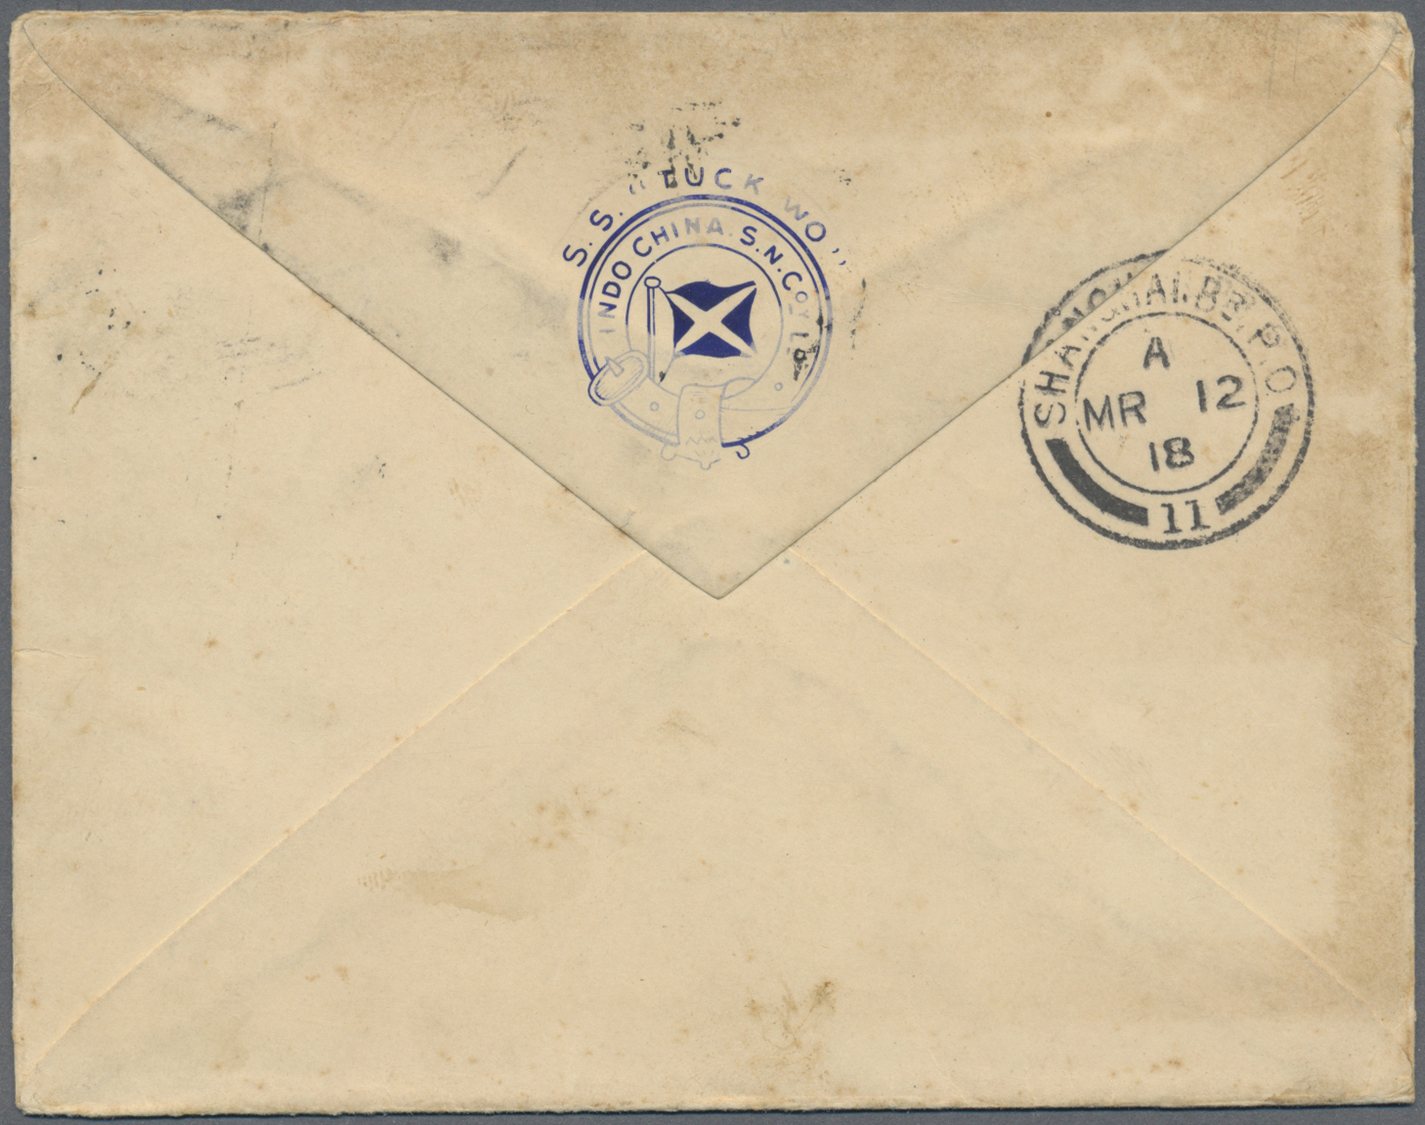 Br Hongkong - Britische Post In China: 1918. Envelope (a Few Spots) Written From 'S.S. "Tuck Wo" Near Hankow' Dated 5th - Lettres & Documents